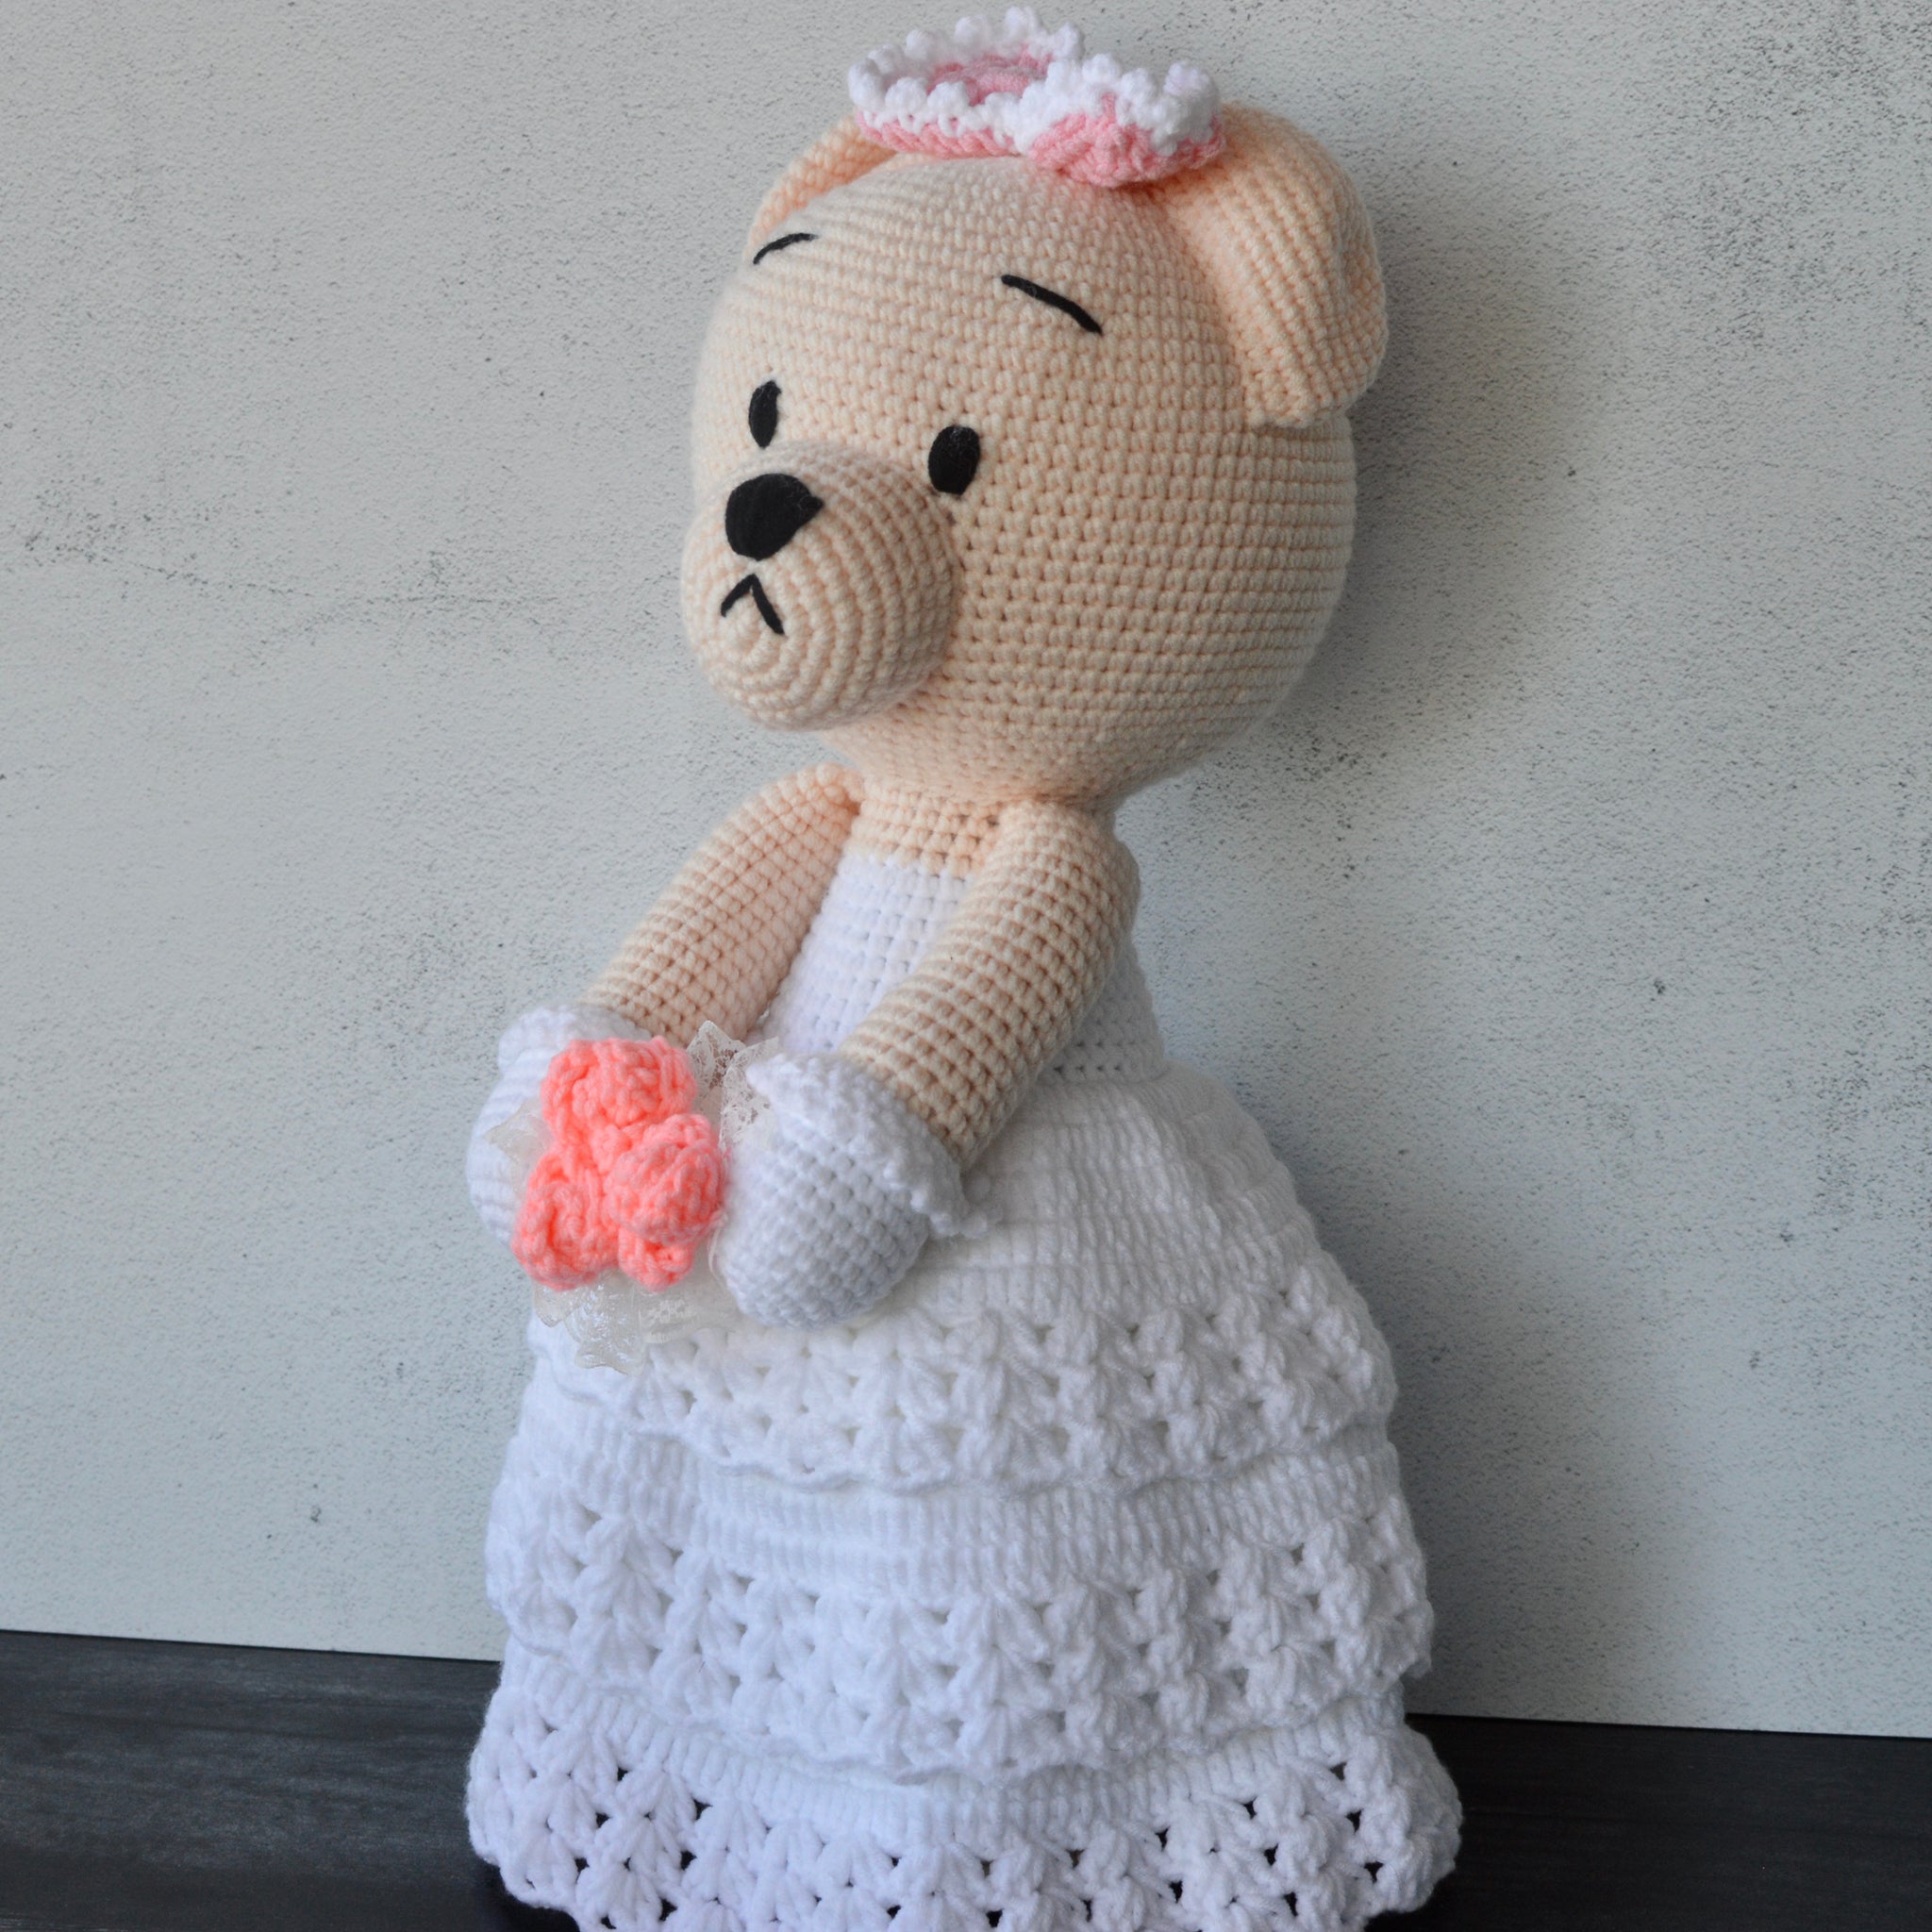 Hand Crocheted Bride and Groom - Large Size